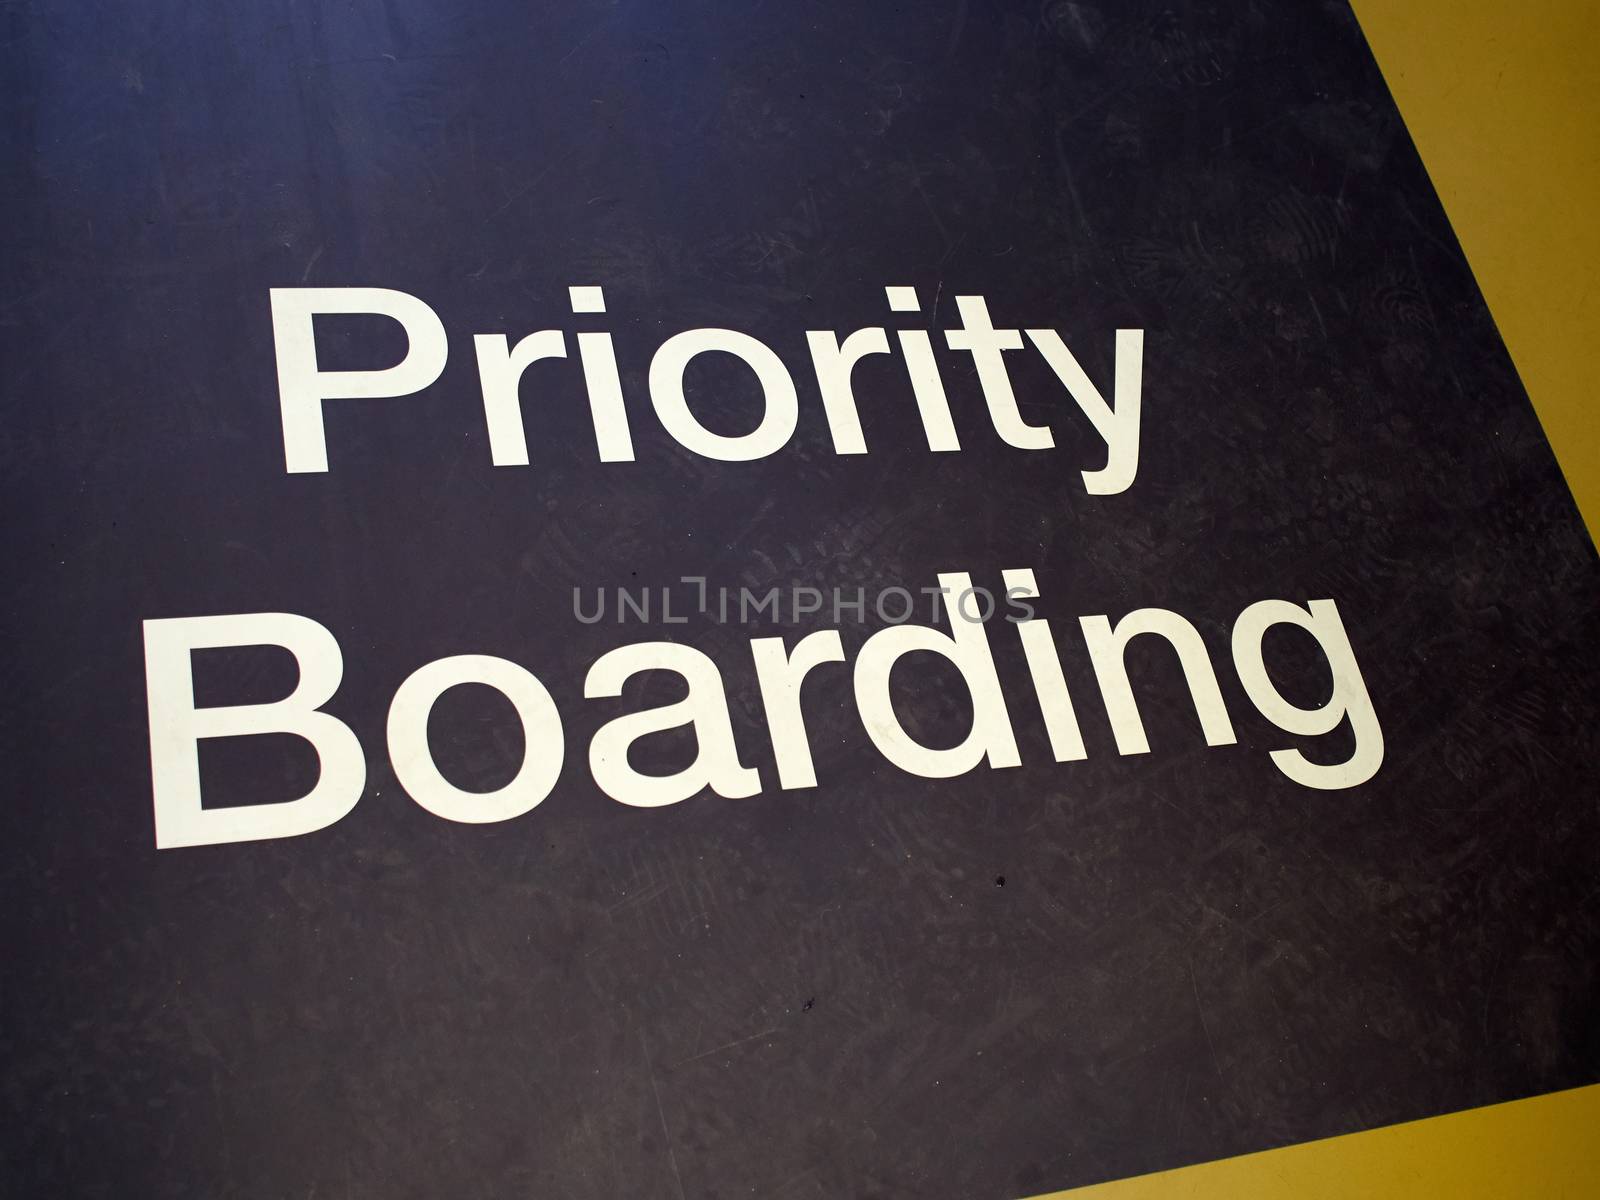 Priority boarding mat sign in an international airport by Ronyzmbow